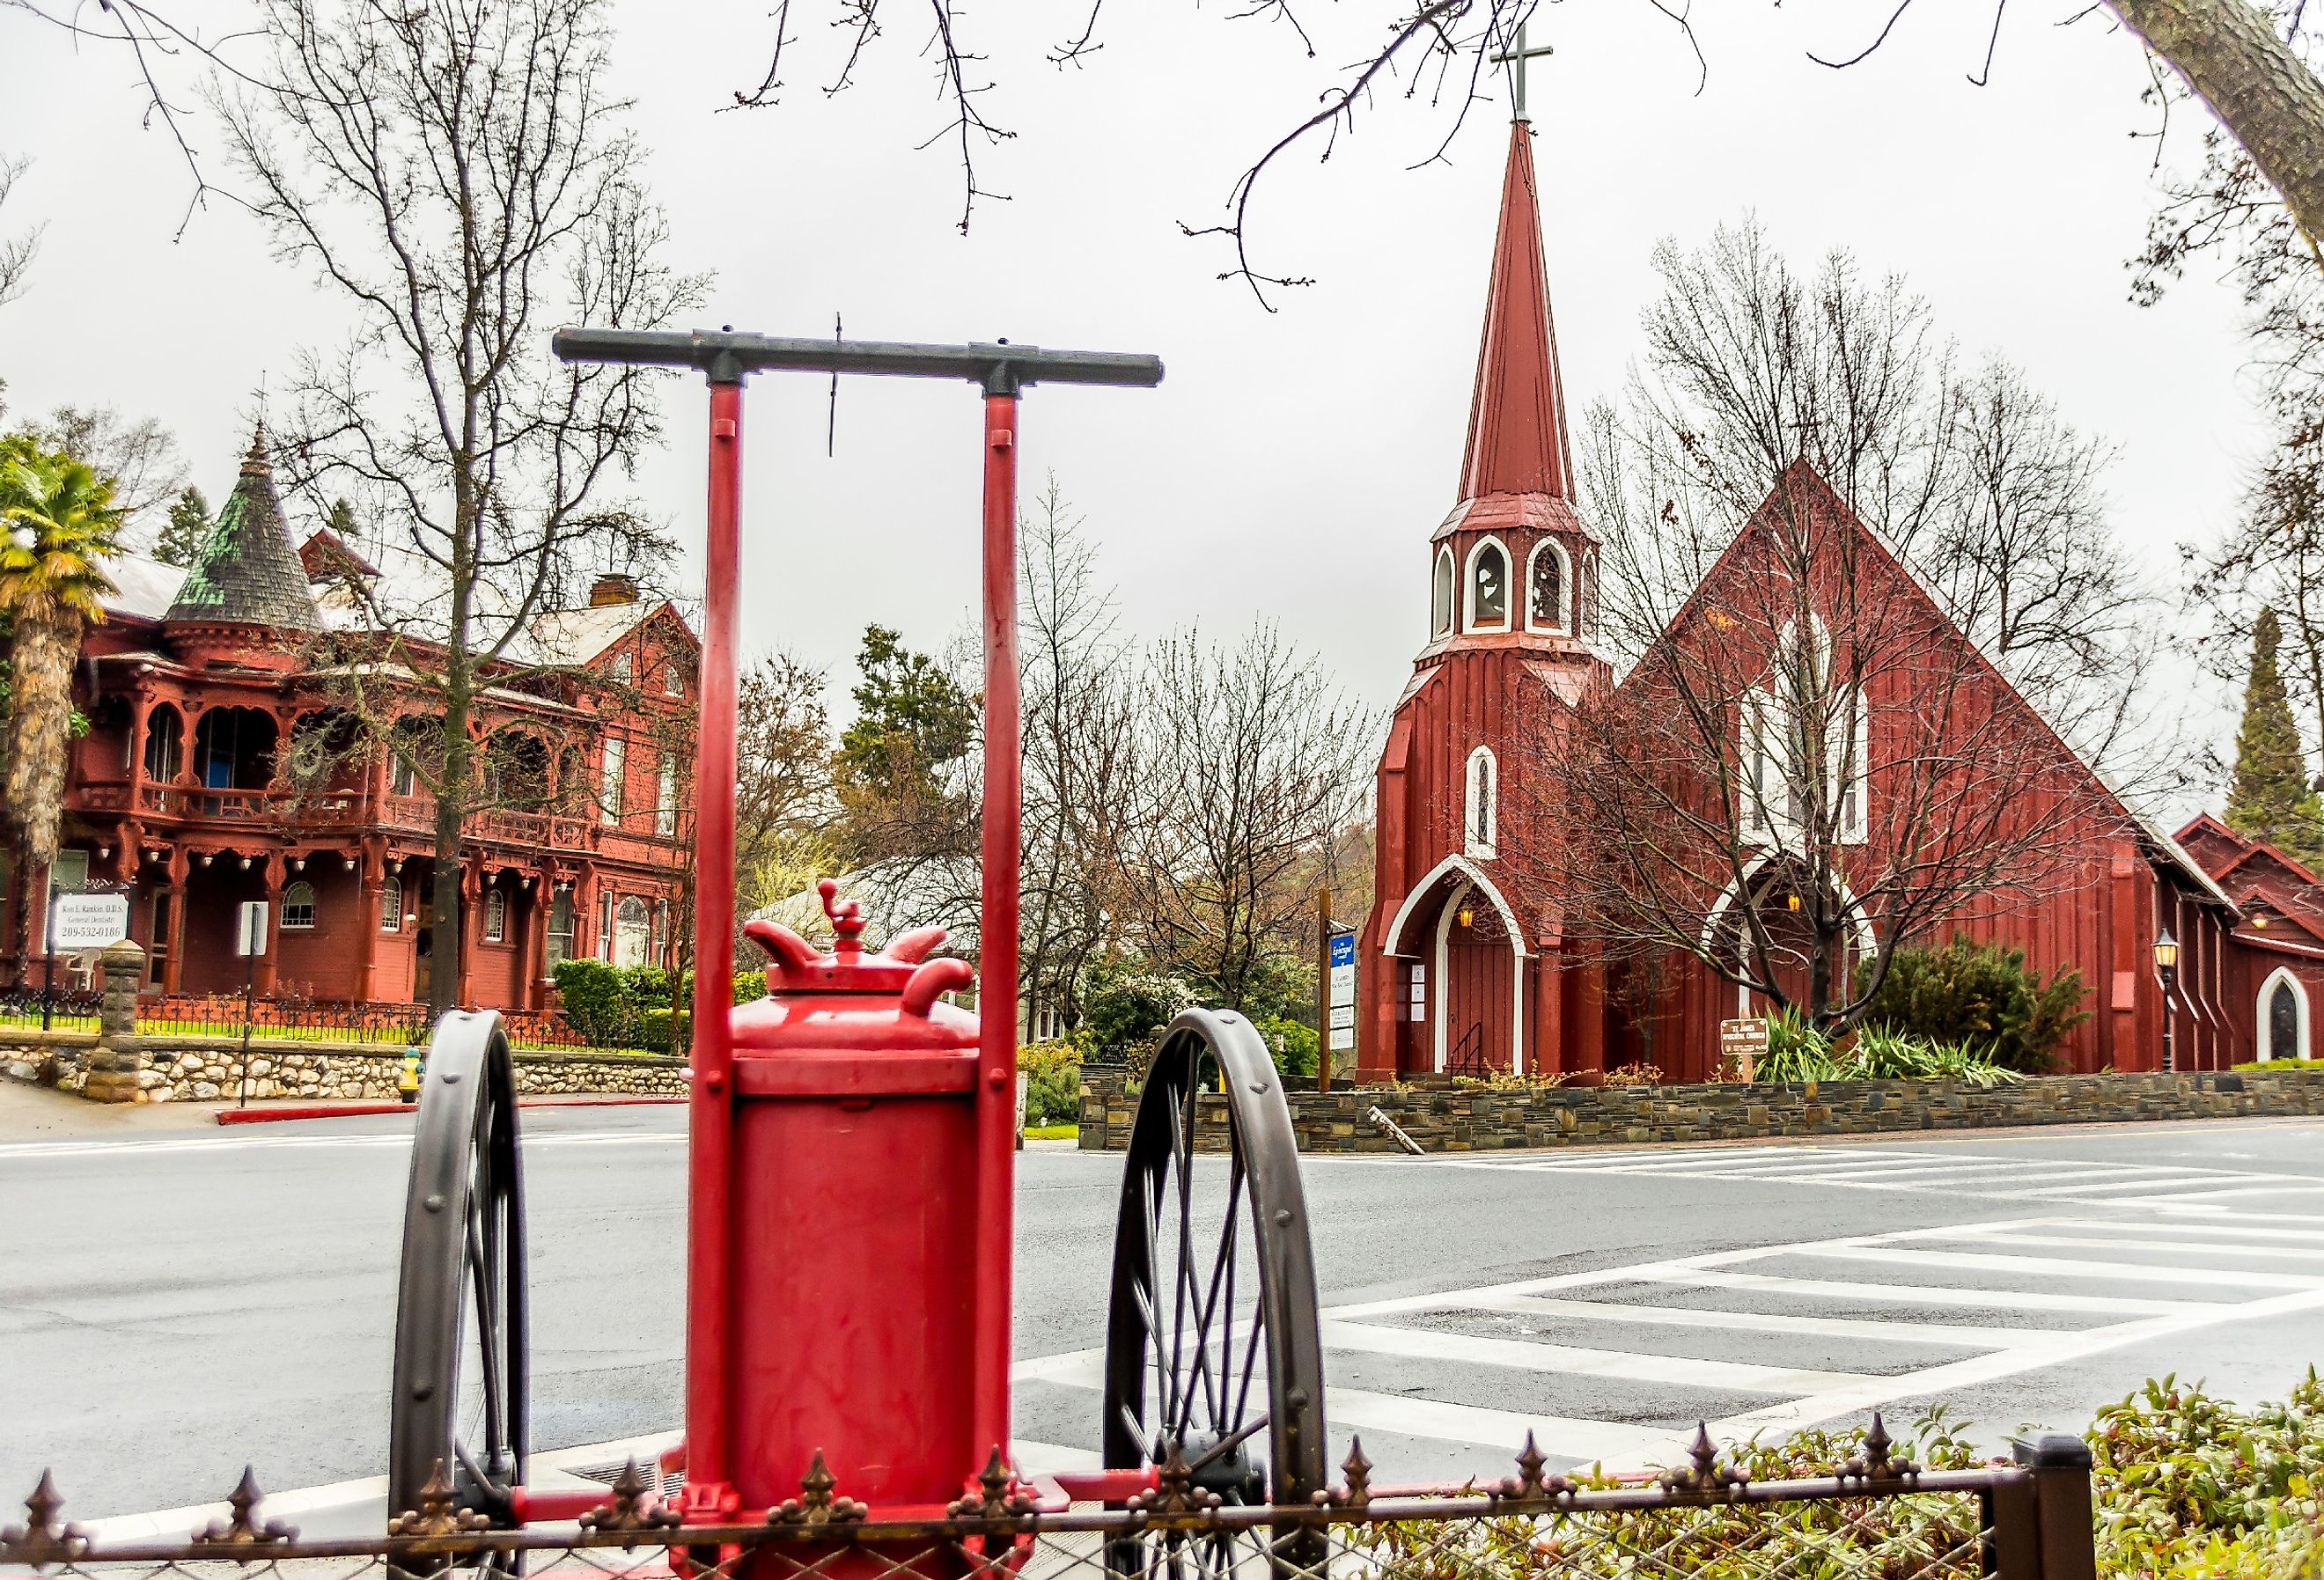 Red Church on Washington Street in historic downtown on a cloudy, wet spring afternoon Sonora, California. Image credit StephanieFarrell via Shutterstock